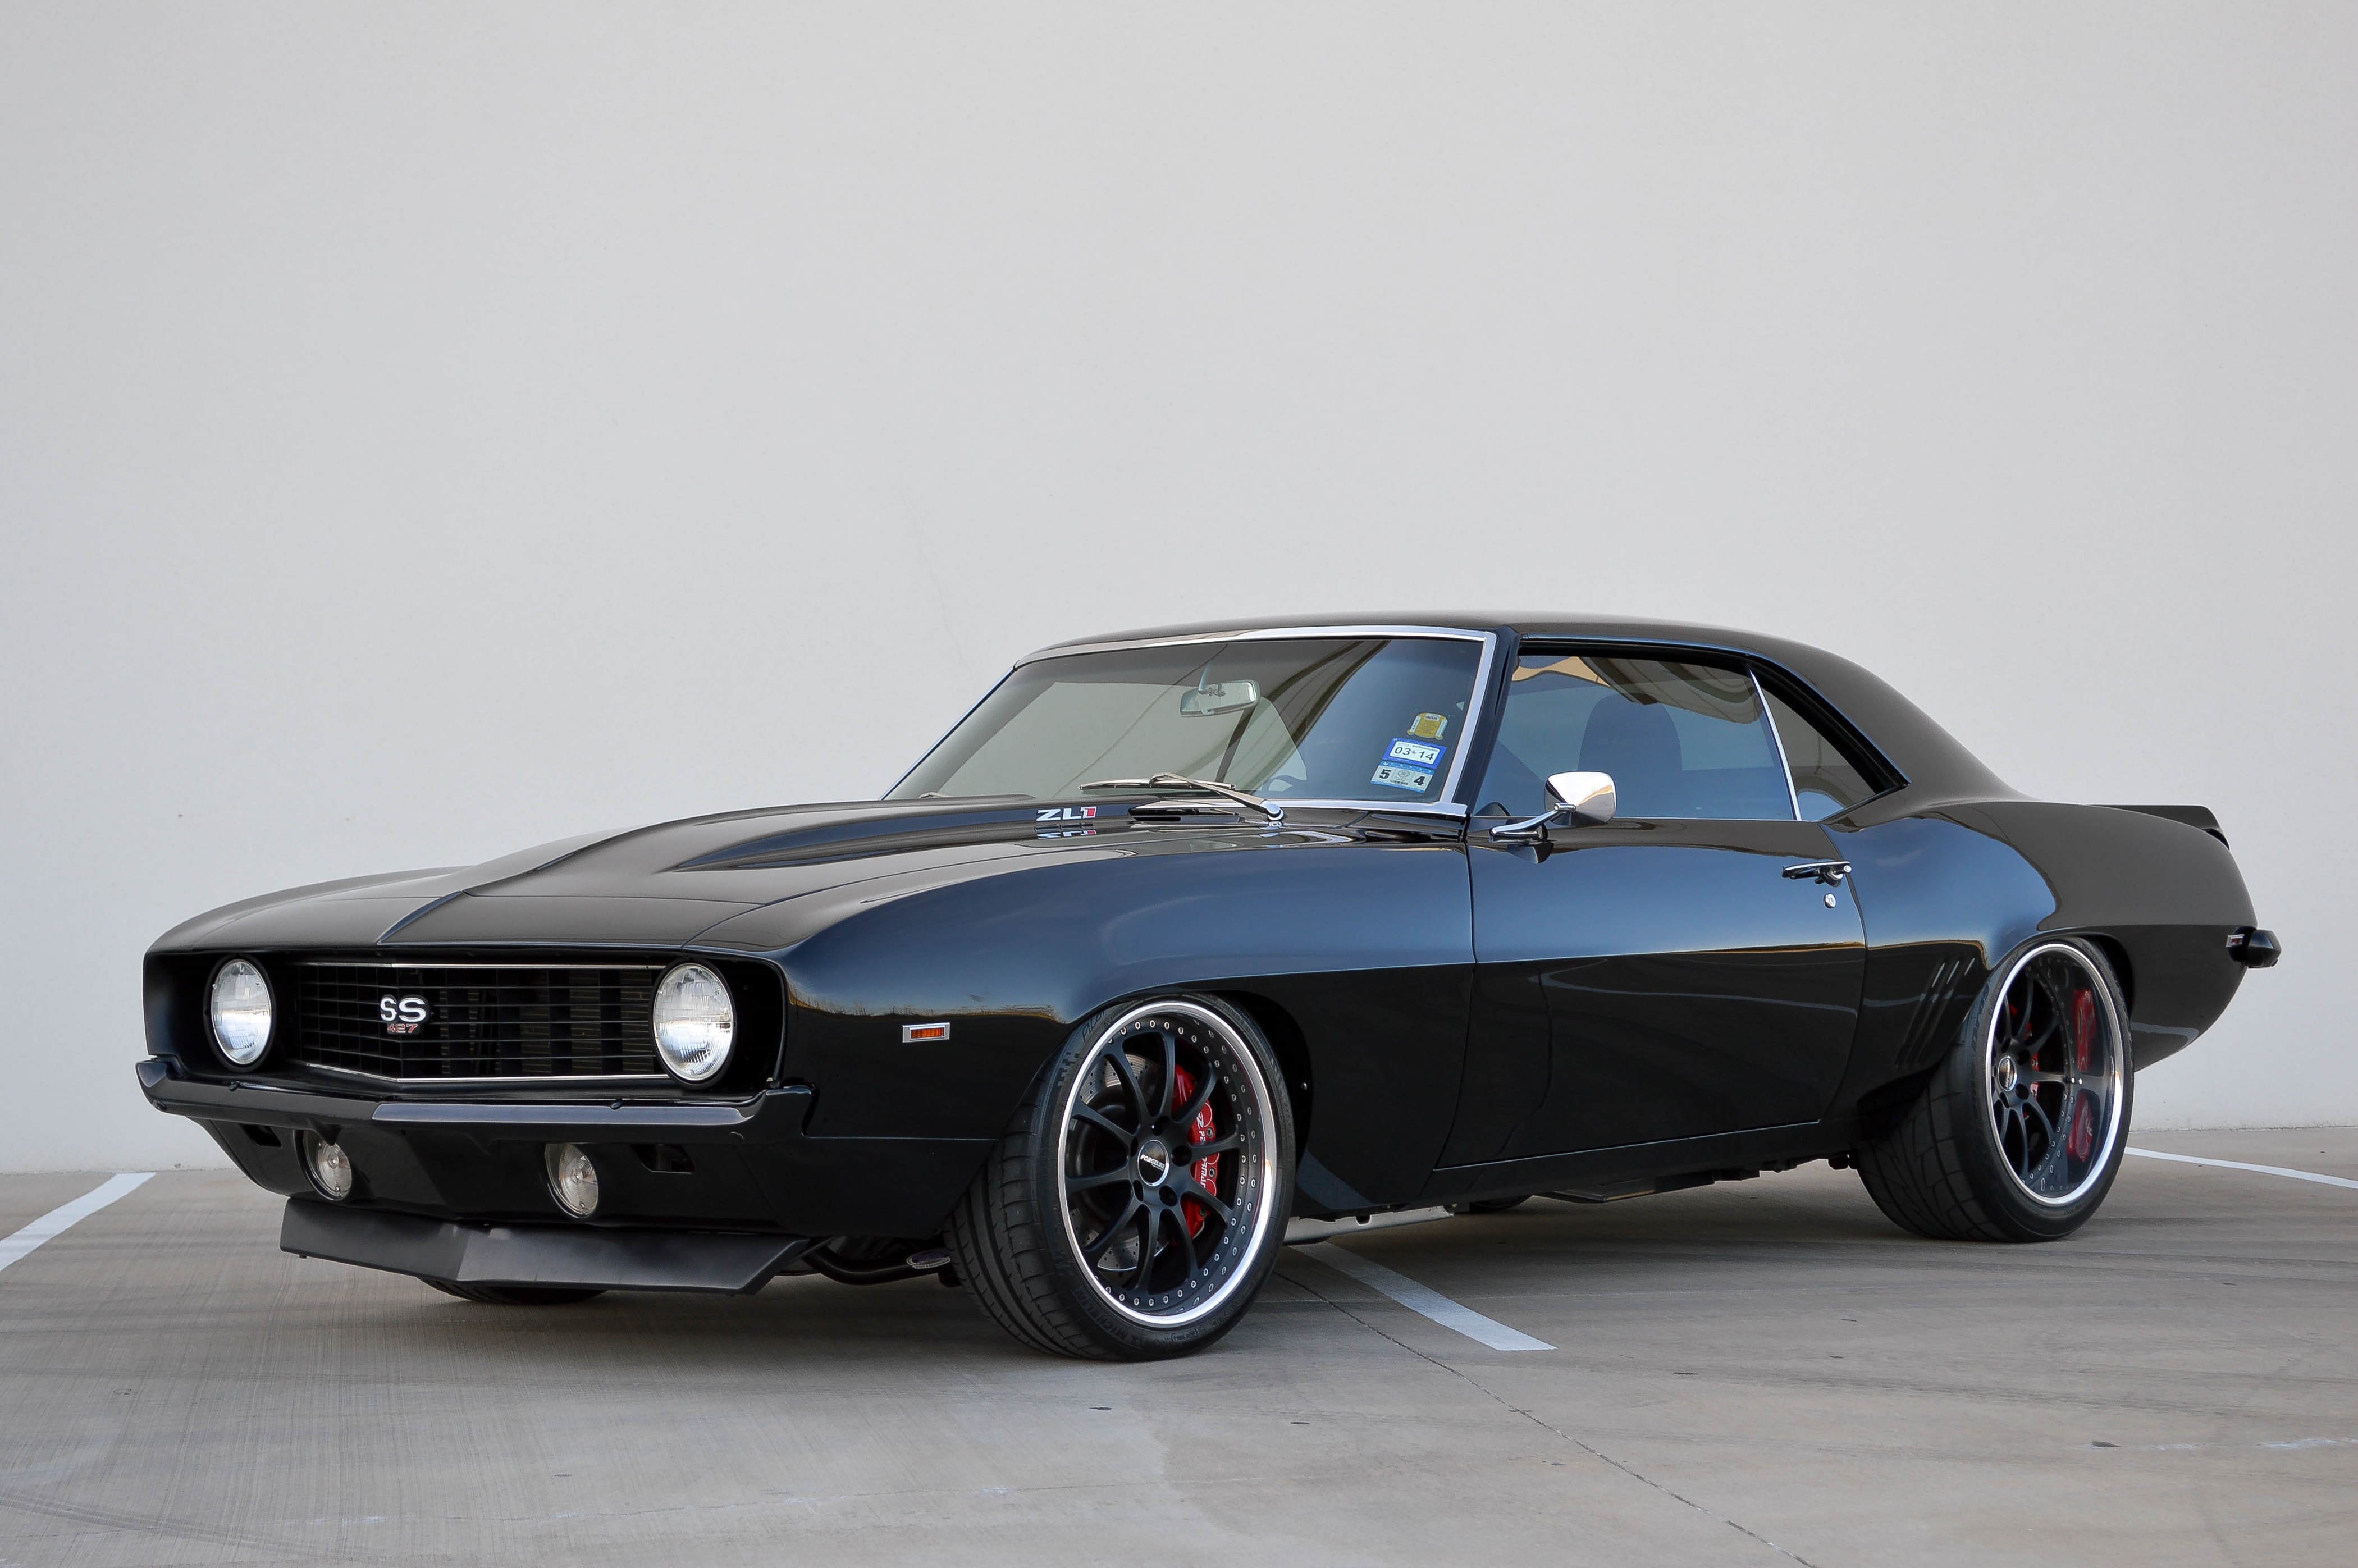 Camaro Ss 1969 Wallpapers Images Photos Pictures Backgroun - 1969 Chevrolet Camaro Pro Touring - HD Wallpaper 